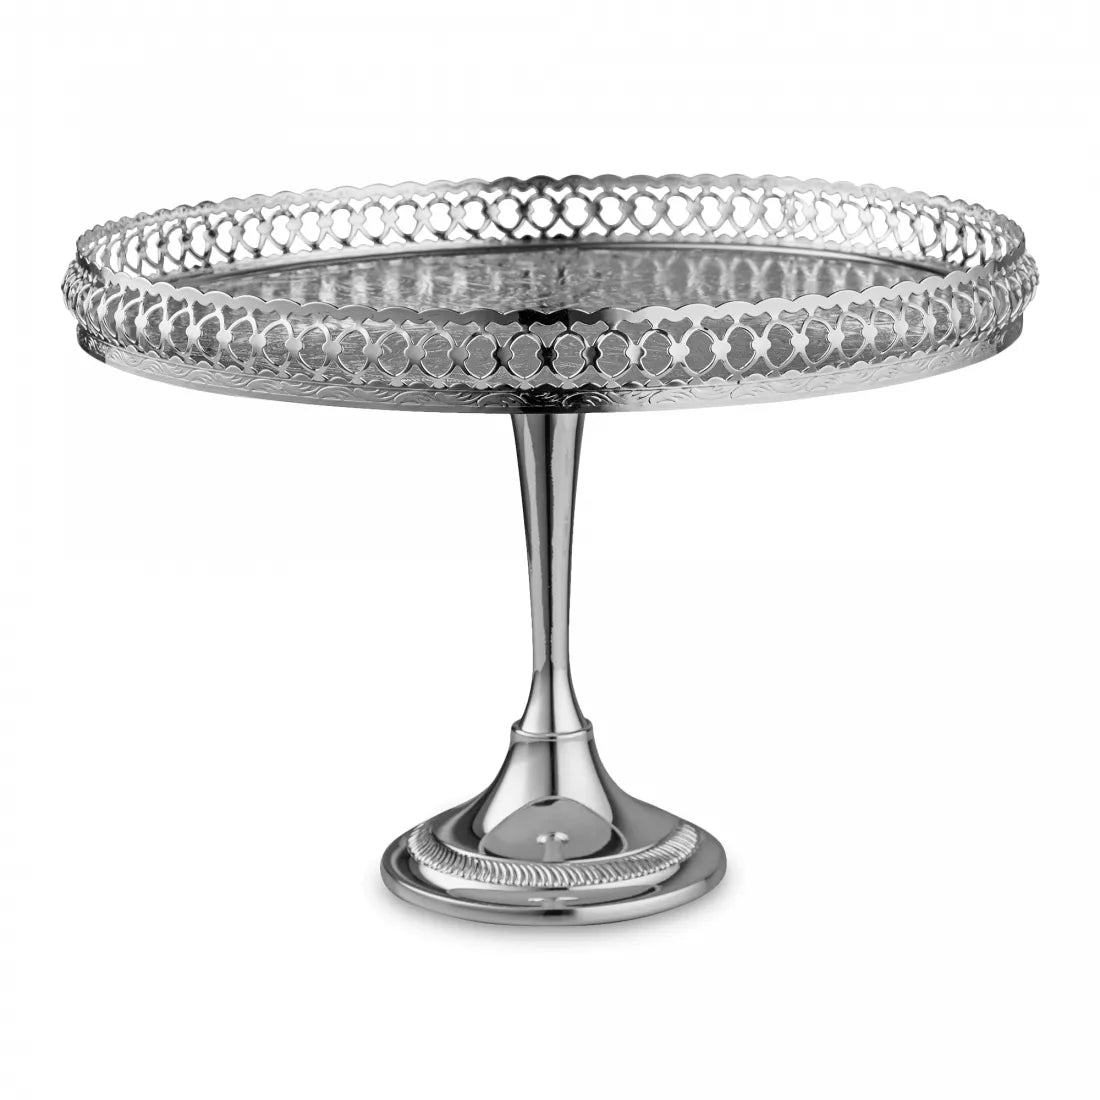 Queen Anne Cake Dish On A Leg Stainless Steel, Silver Large